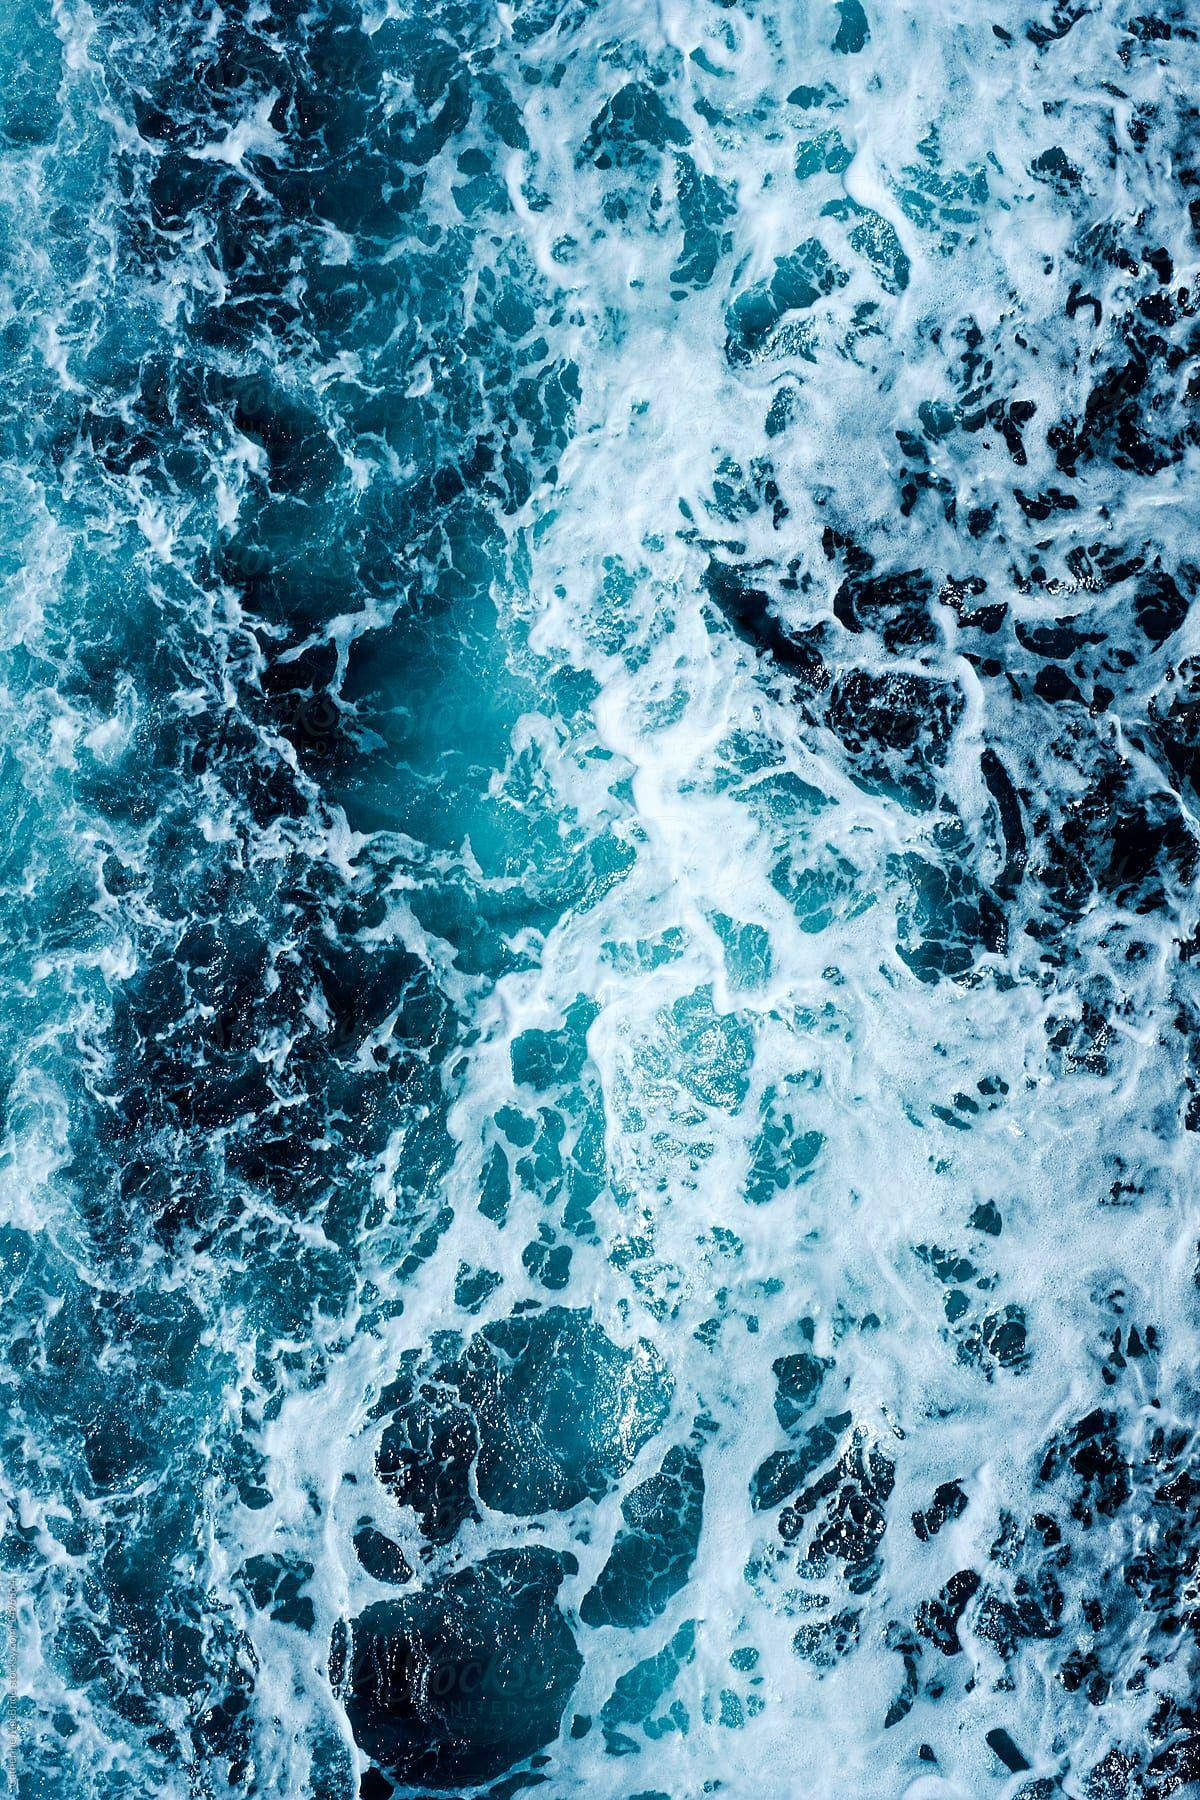 Blue Water With White Foam On The Surface